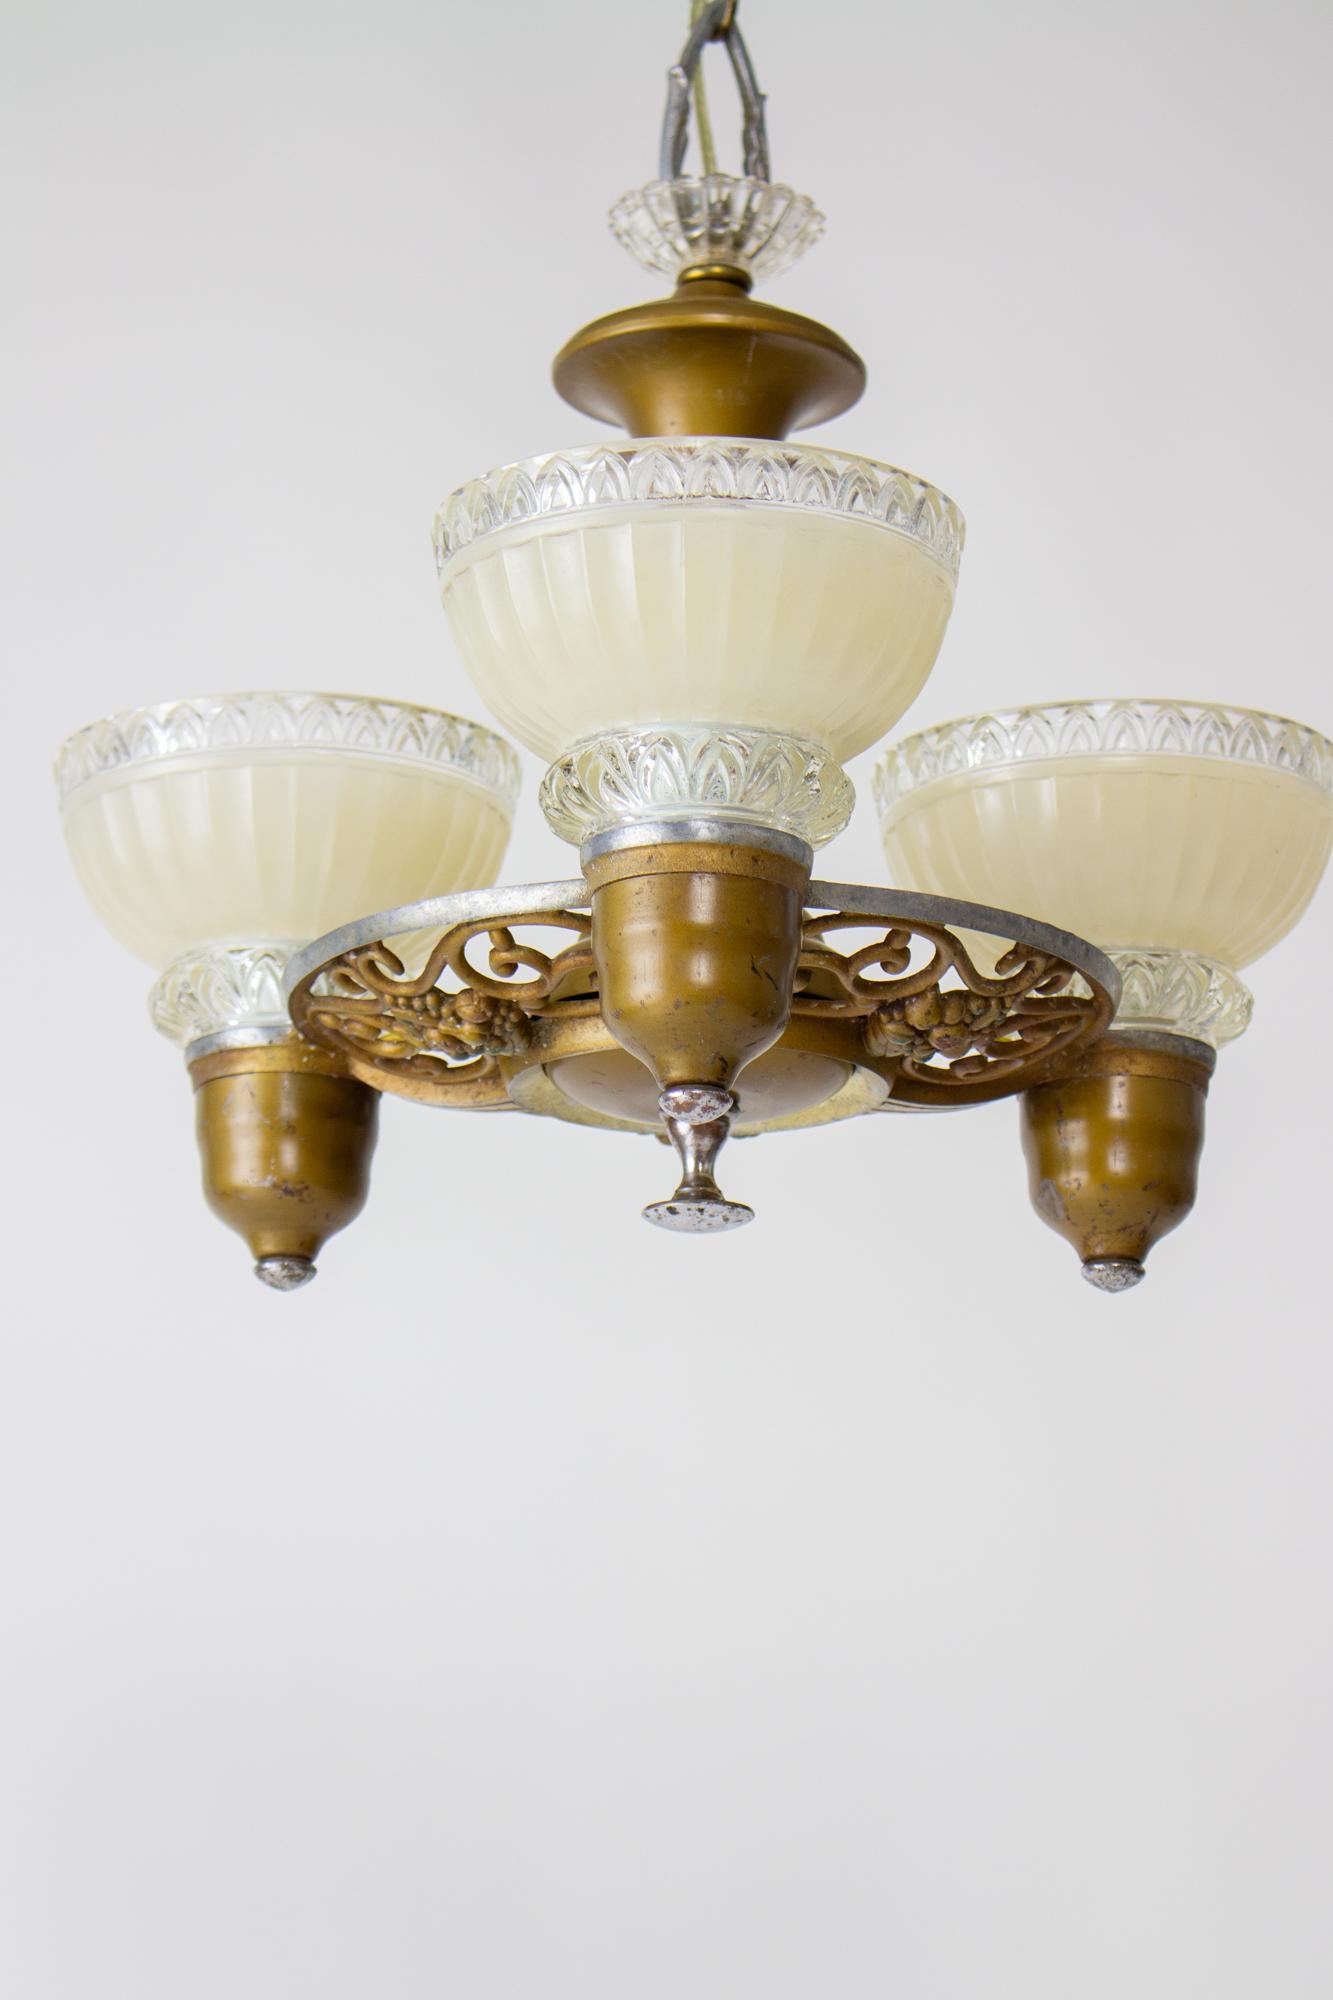 1930’s Art Deco Chandelier with Cream and Clear Glass Shades In Good Condition For Sale In Canton, MA